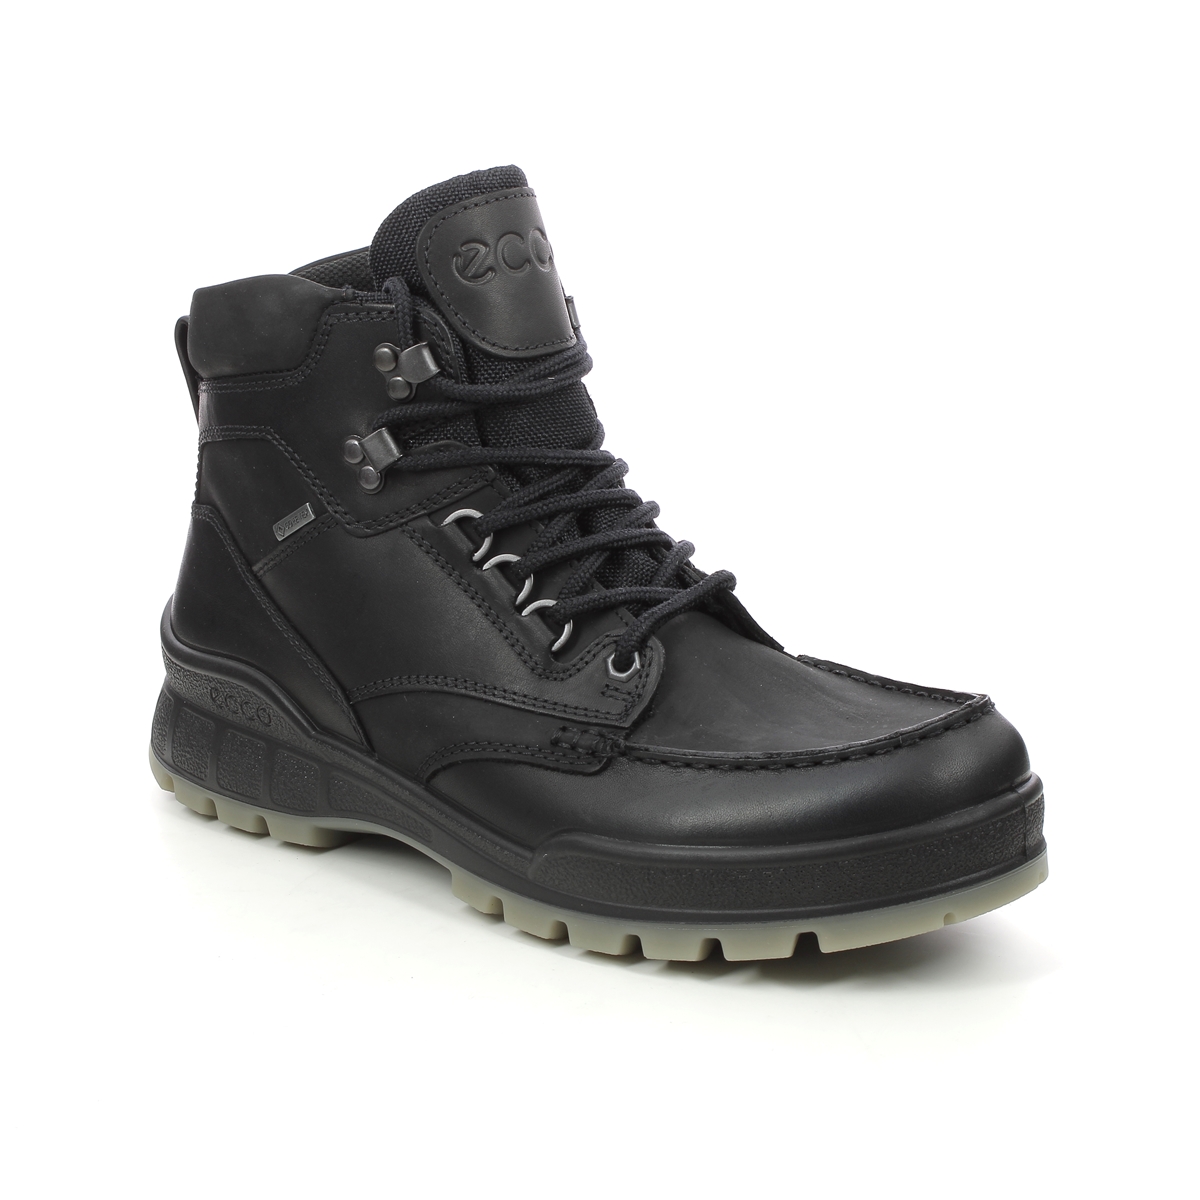 ECCO Track 25 Boot Gtx Black leather Mens Outdoor Walking Boots 831704-51052 in a Plain Leather in Size 47